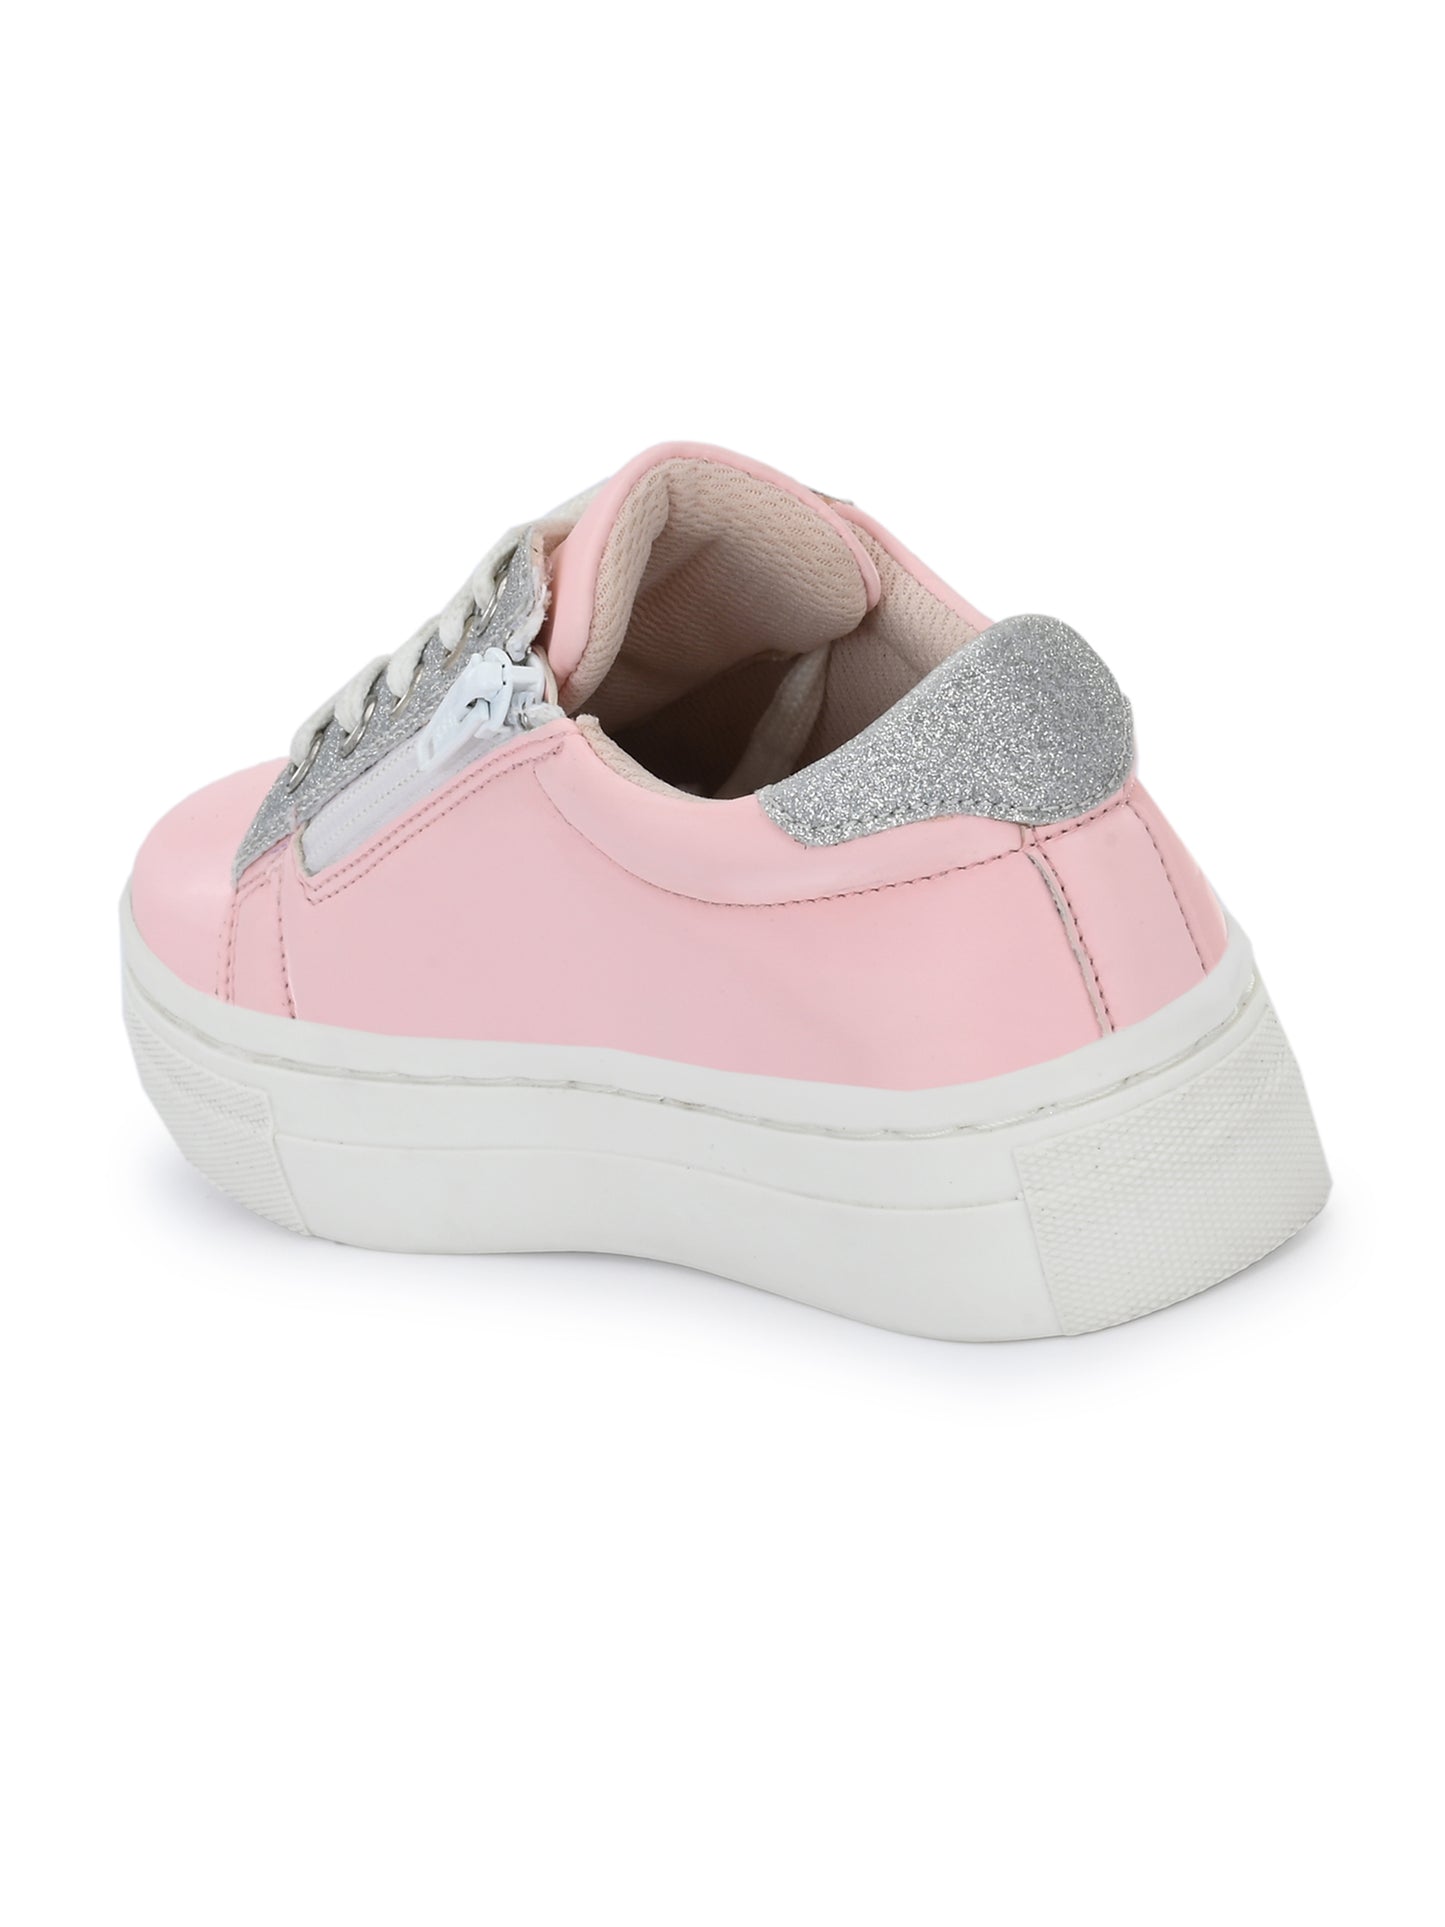 Nice Pink Shoes for Kids